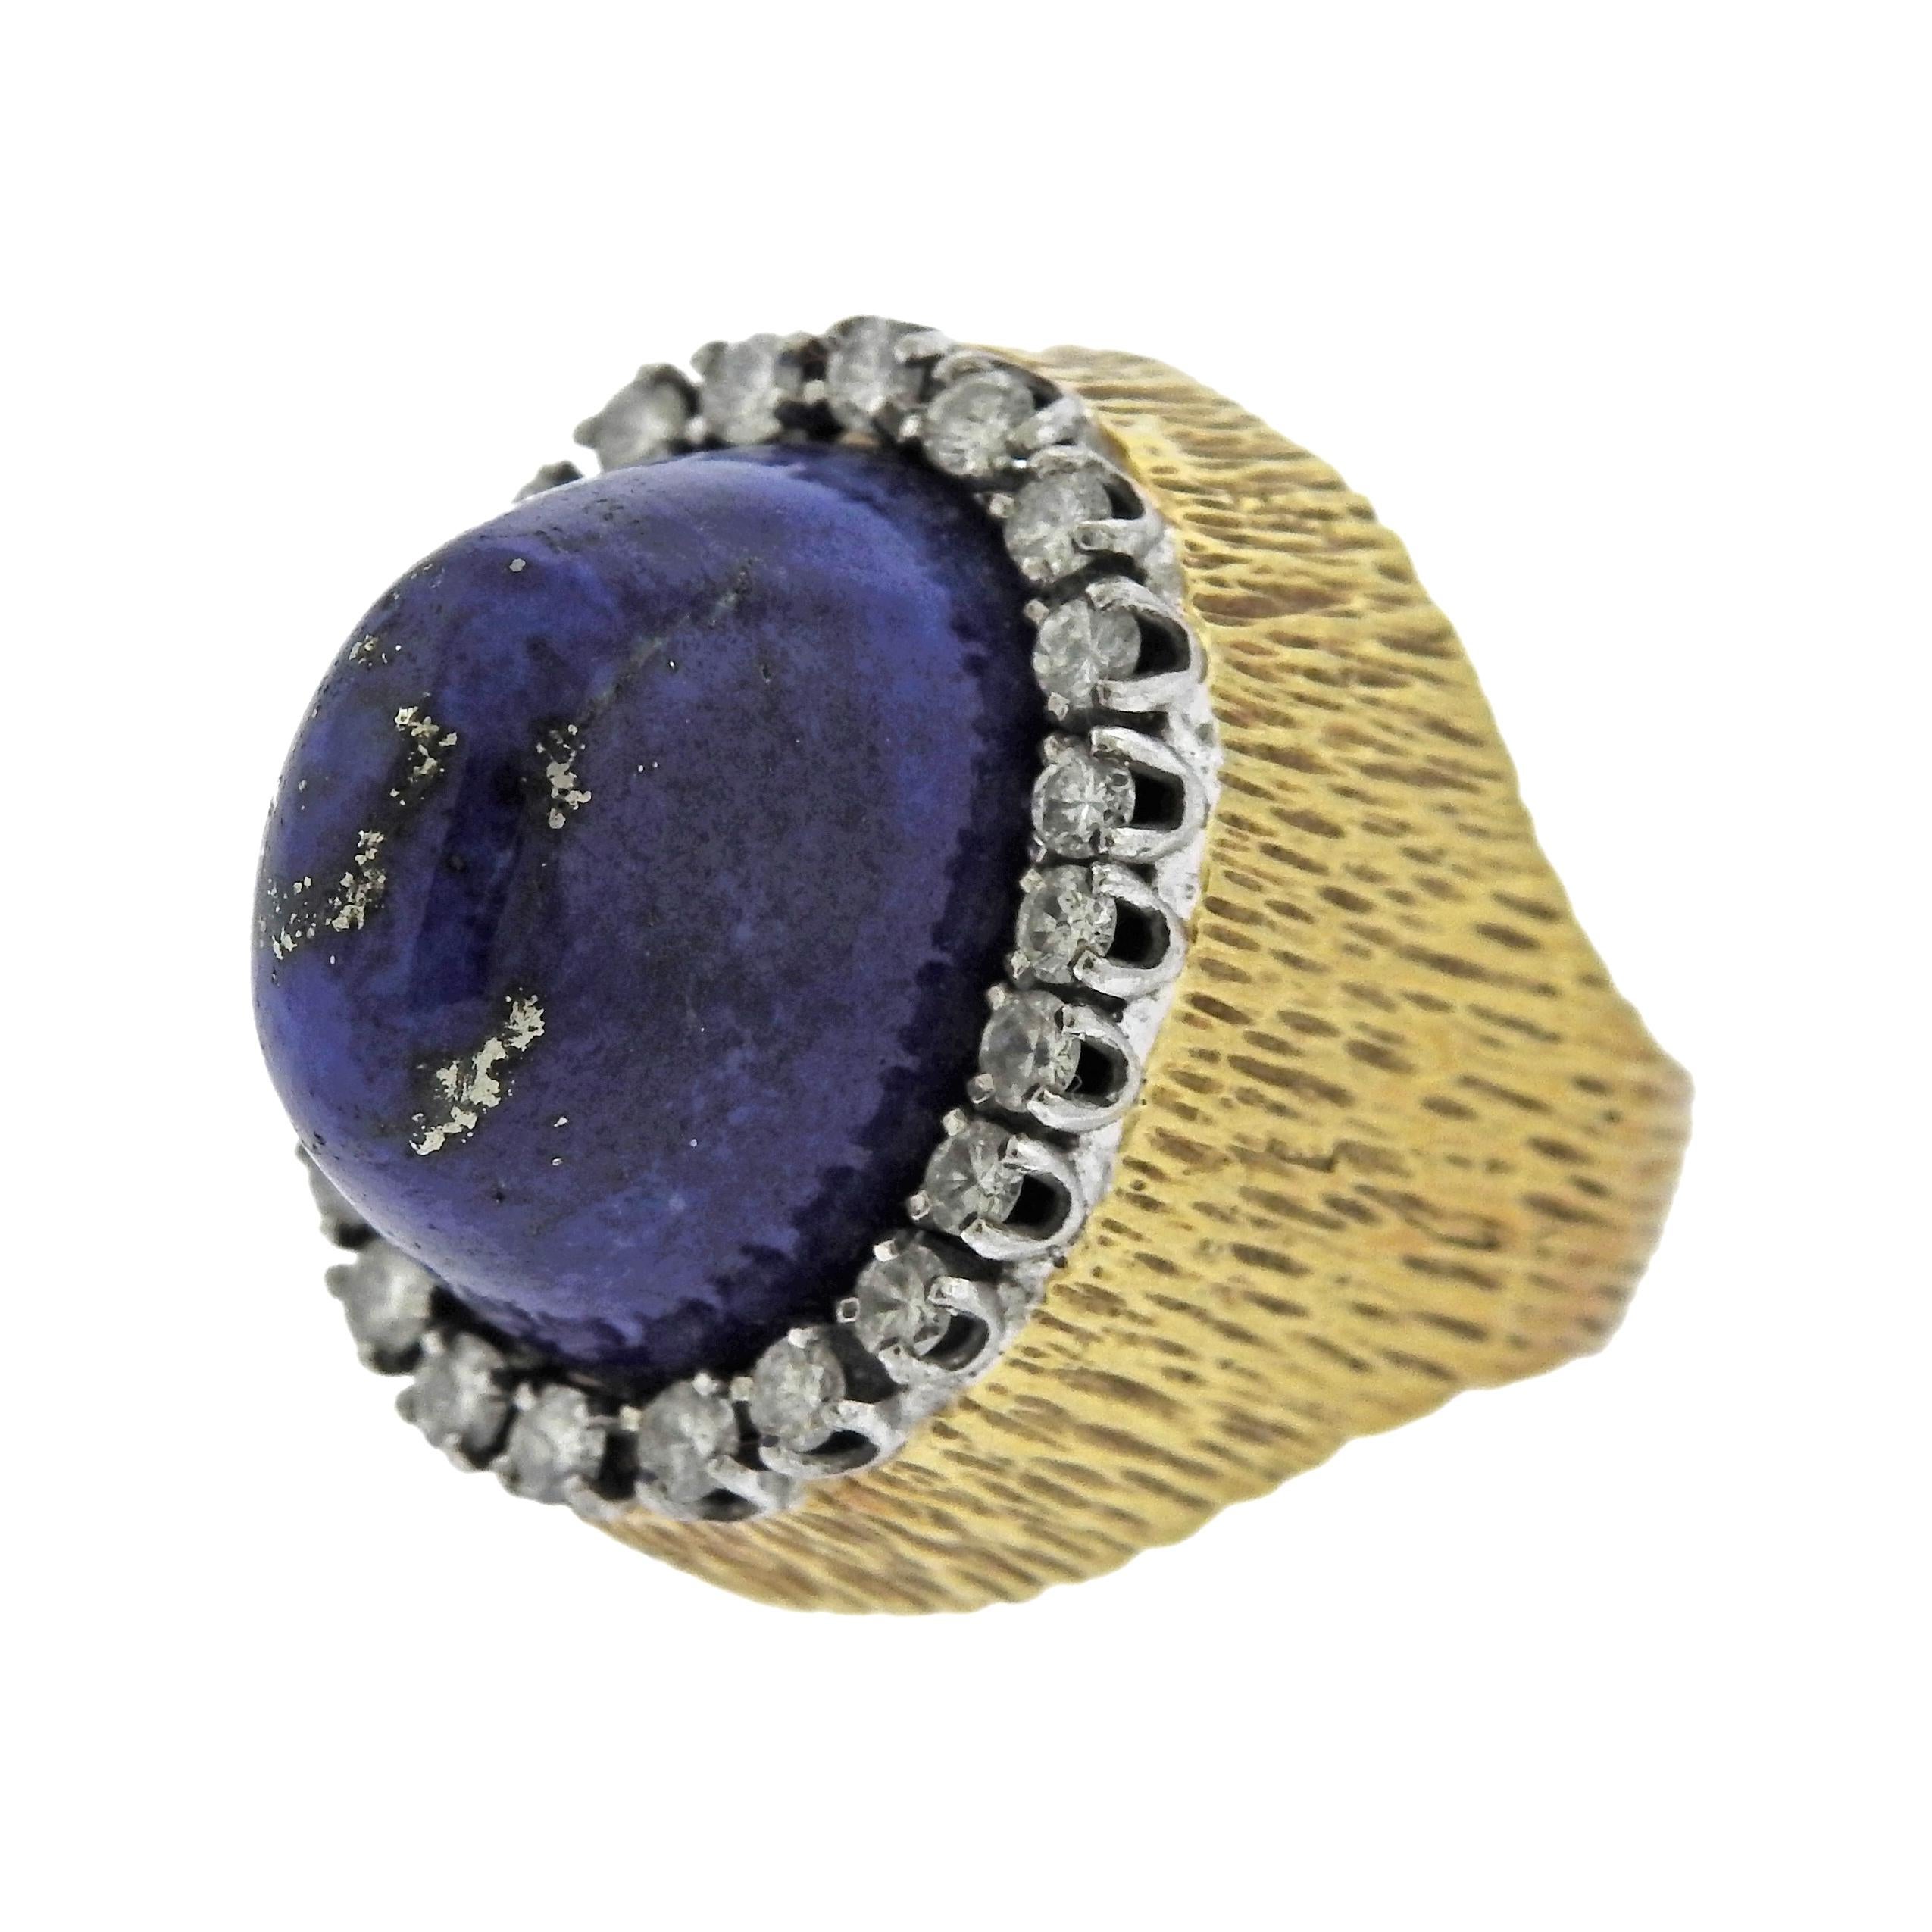 Large circa 1960s cocktail ring, set with lapis lazuli, surrounded with approx. 1.10ctw in SI/H diamonds. Ring size - 6.5, ring top - 25mm x 20mm, sits approx. 24mm from the finger. Weight is 25.4 grams, marked 18k, Swiss Art. 